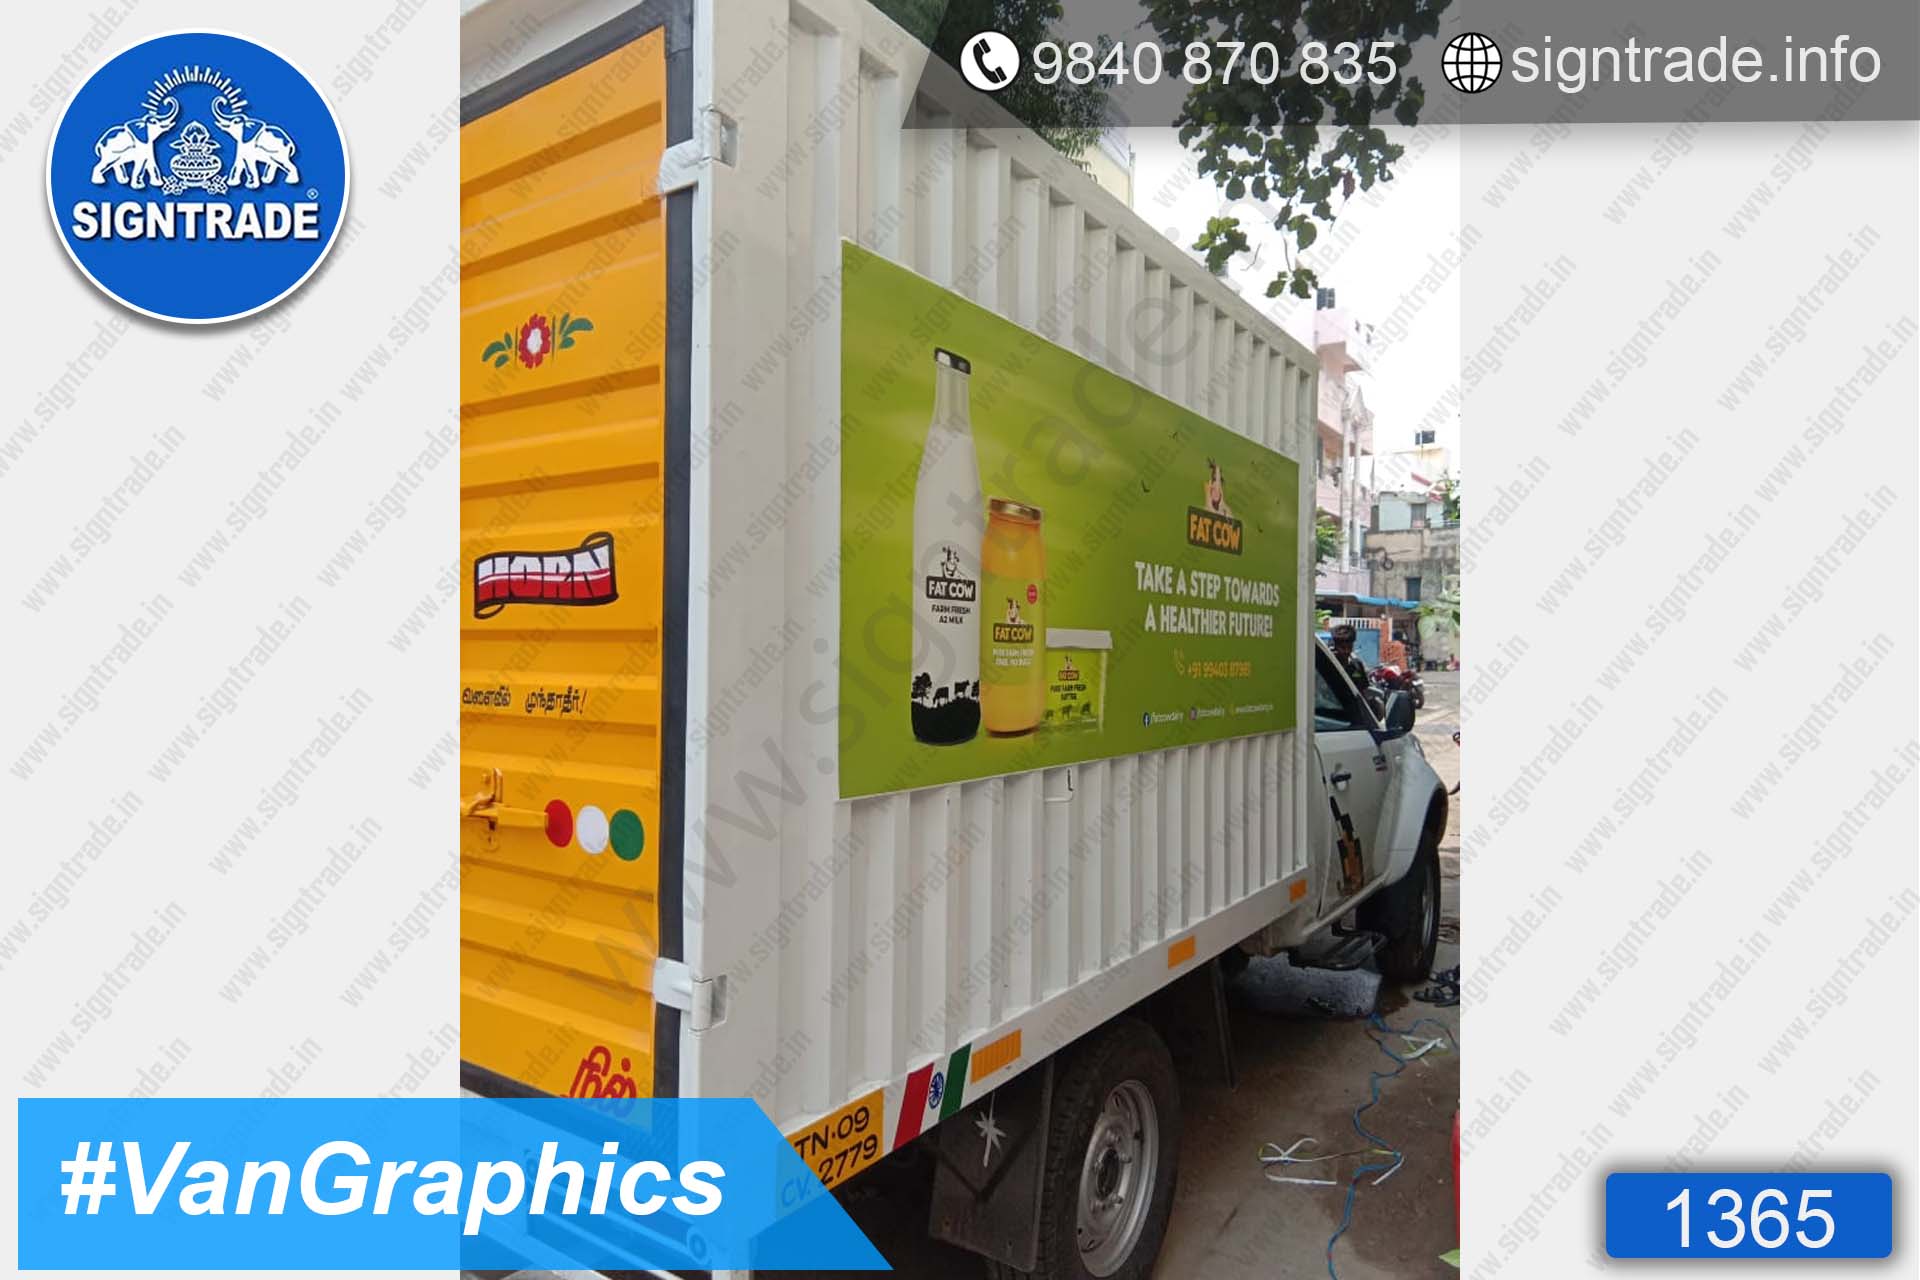 1365, Vehicle Graphics, Vehicle Wrapping, Vehicle Branding, Vinyl Vehicle Branding, Van Graphics, Van Wrapping, Van Branding, Vinyl Van Branding, Car Graphics, Car Wrapping, Car Branding, Vinyl Car Branding, Car Stickers, Van Car Stickers